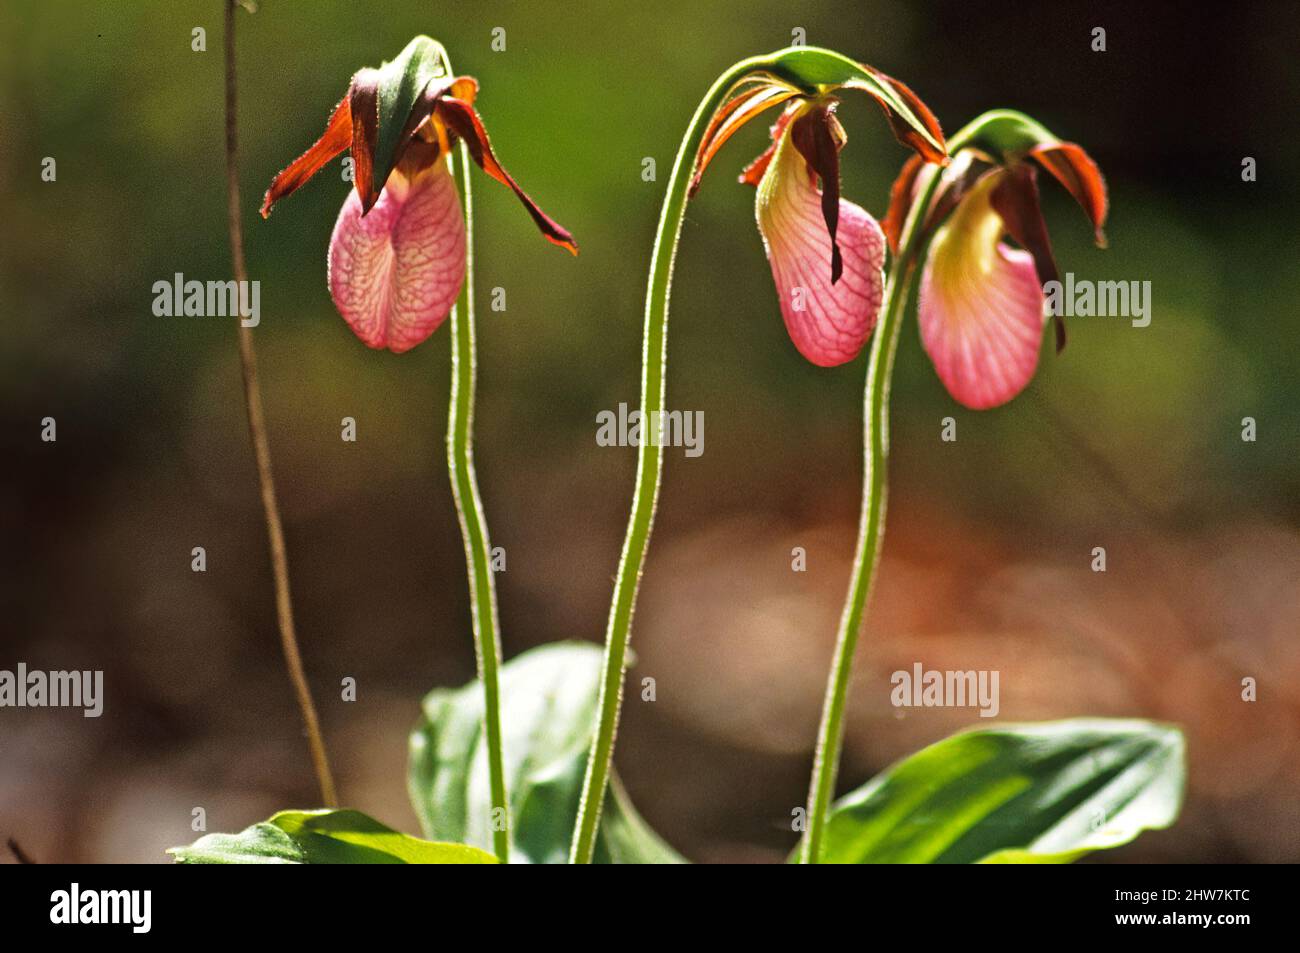 Pink lady's slipper orchids Stock Photo